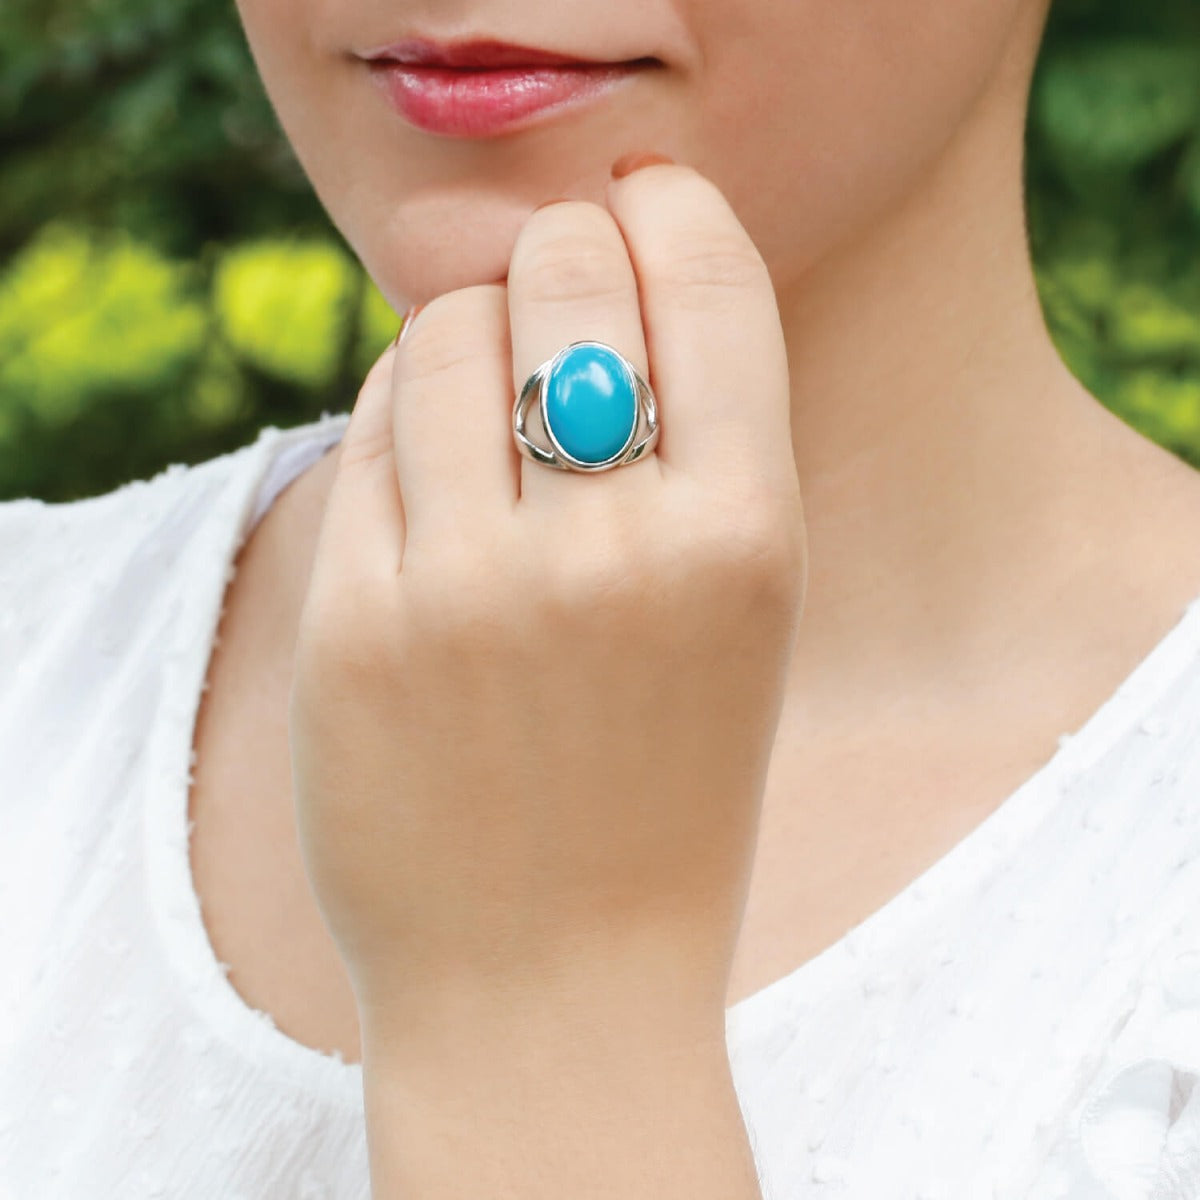 turquoise ring, buy silver ring, sterling silver ring, gemstone ring, buy sterling silver ring, buy gemstone jewelry, buy jewelry online, turquoise jewelry